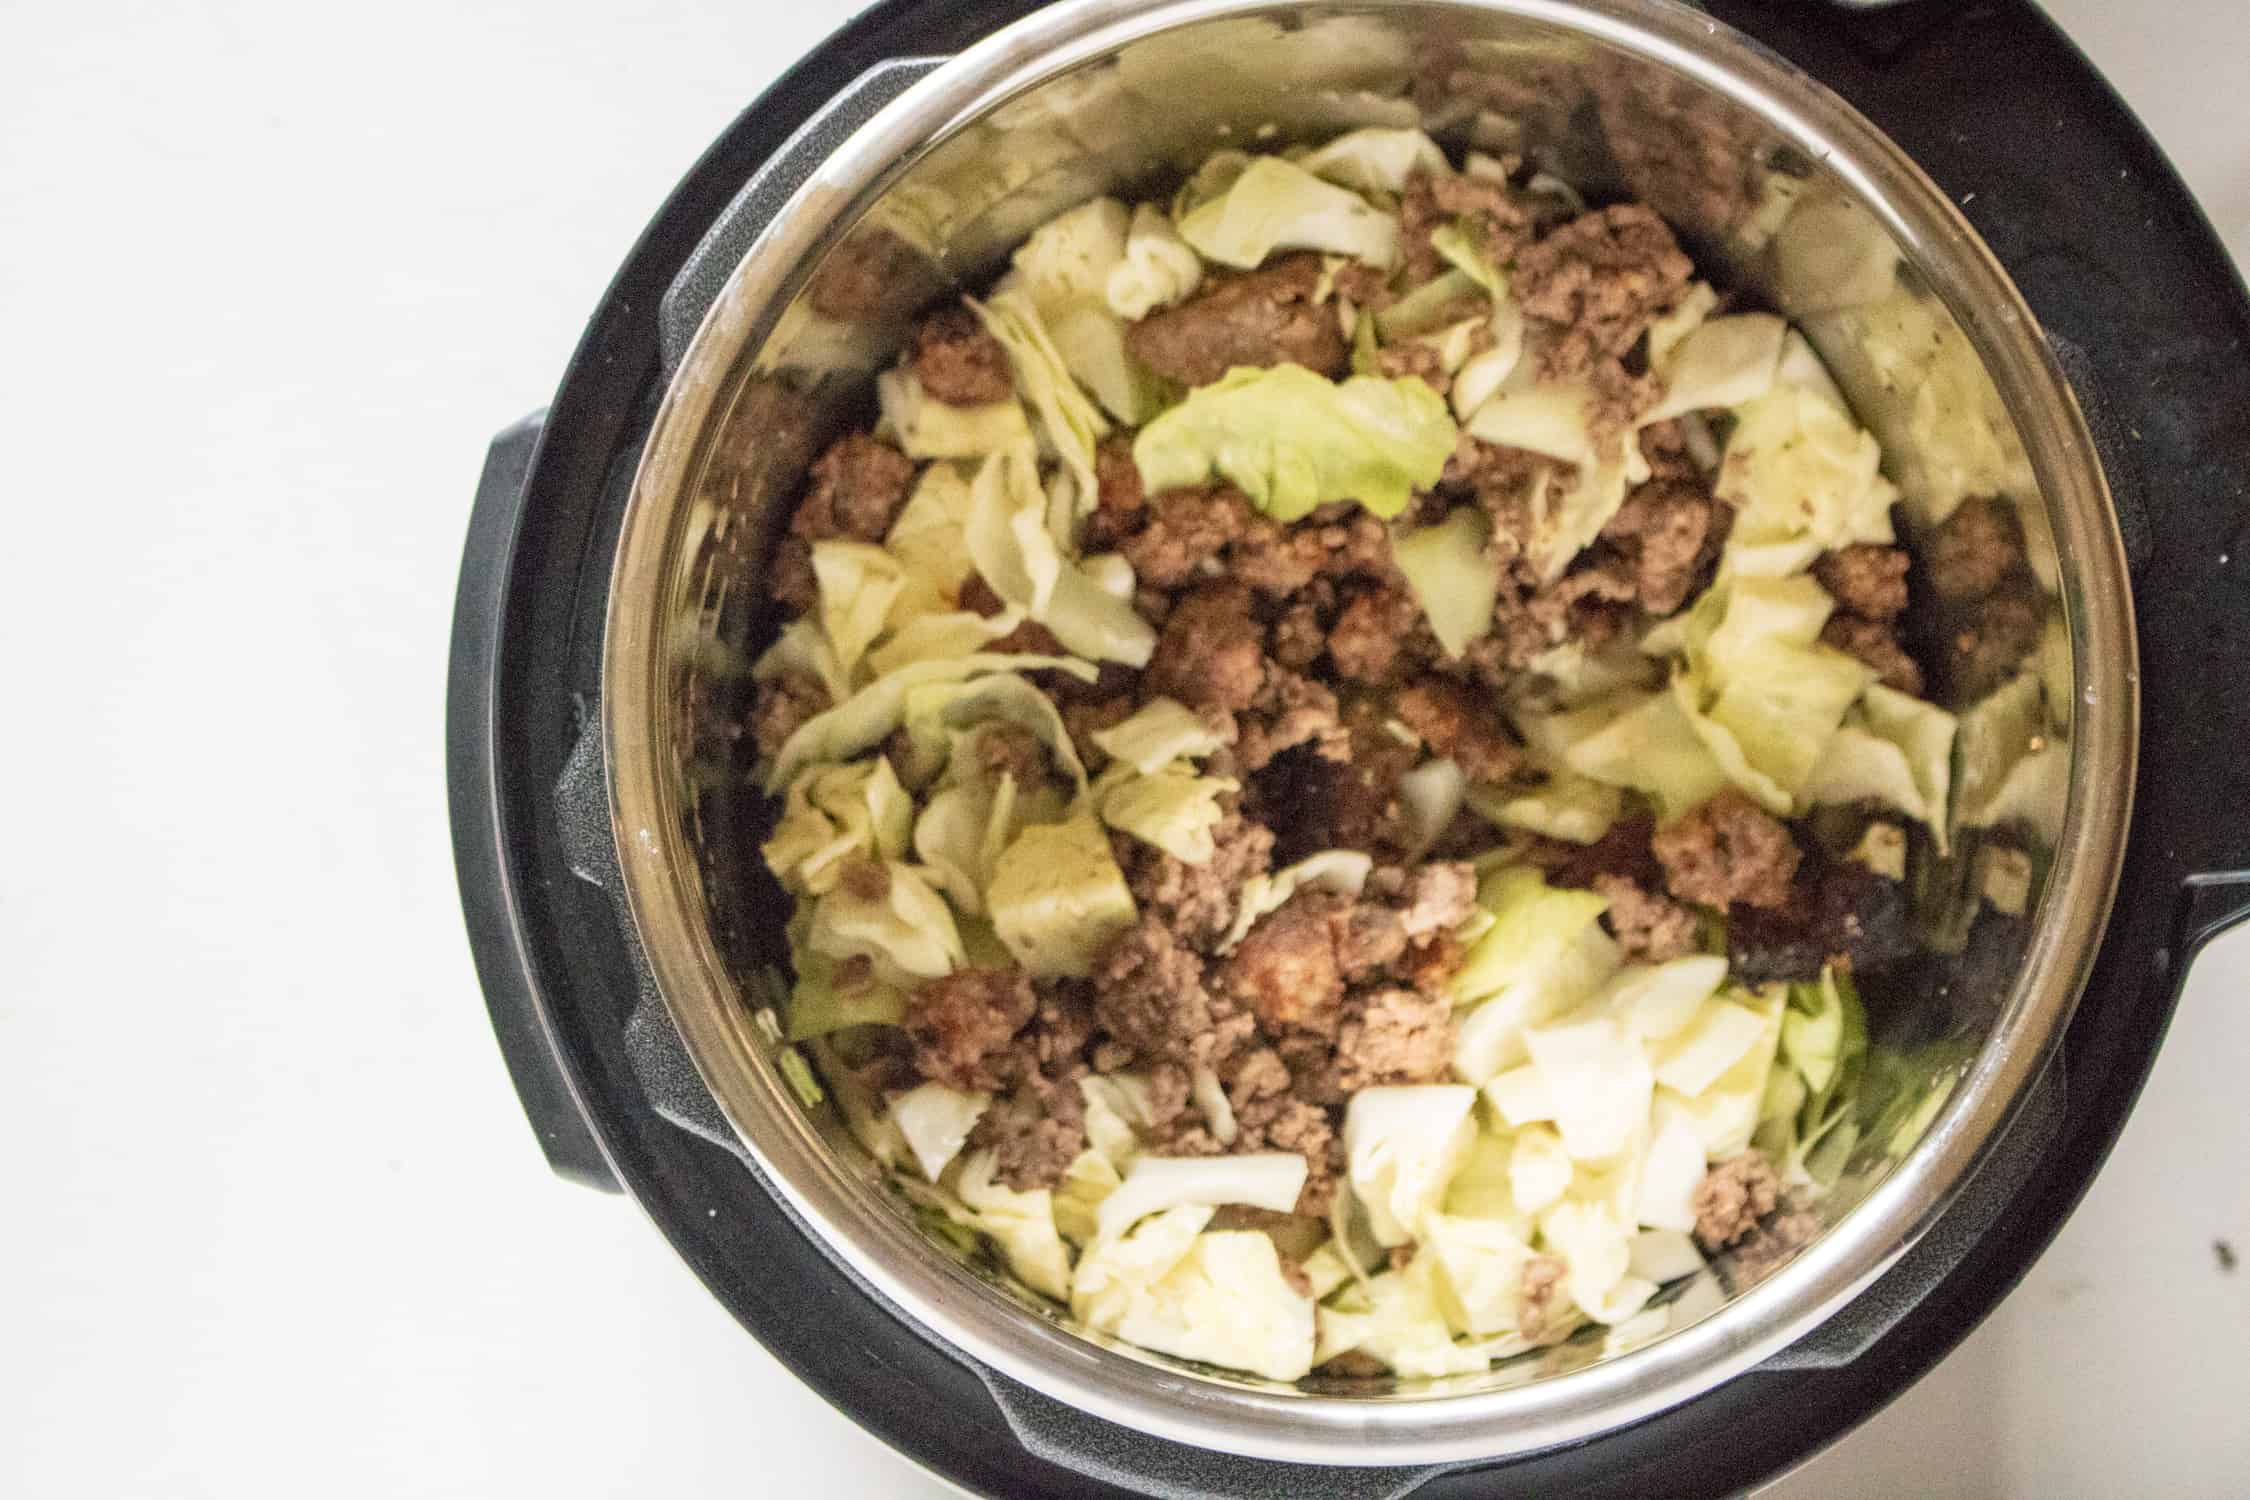 cut up cabbage, sausage and ground beef in an instant pot